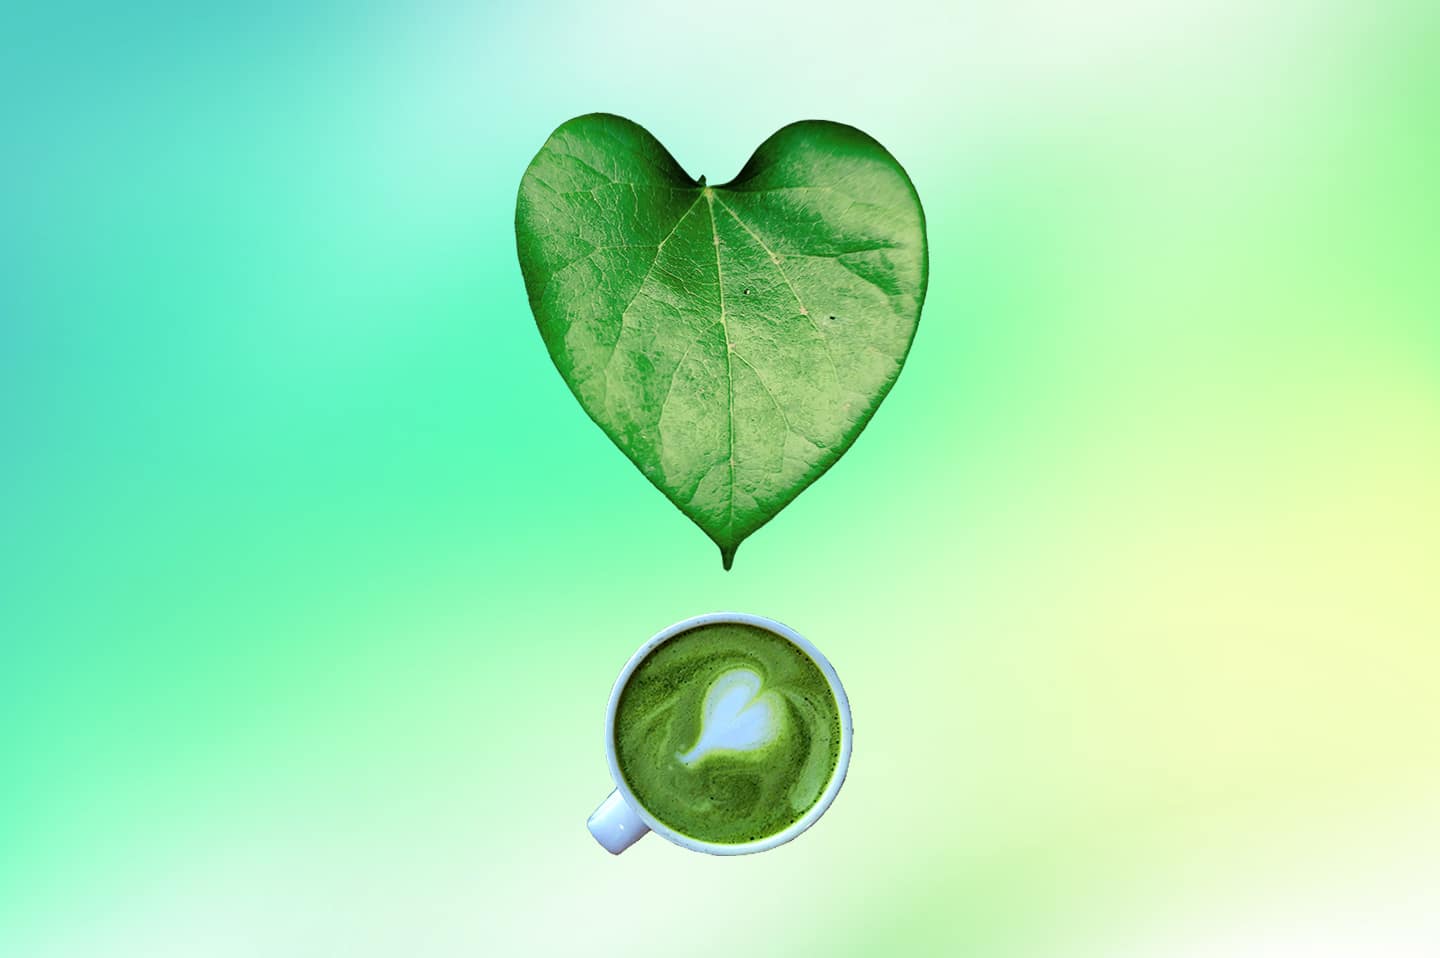 cup point exclamation coeur vert